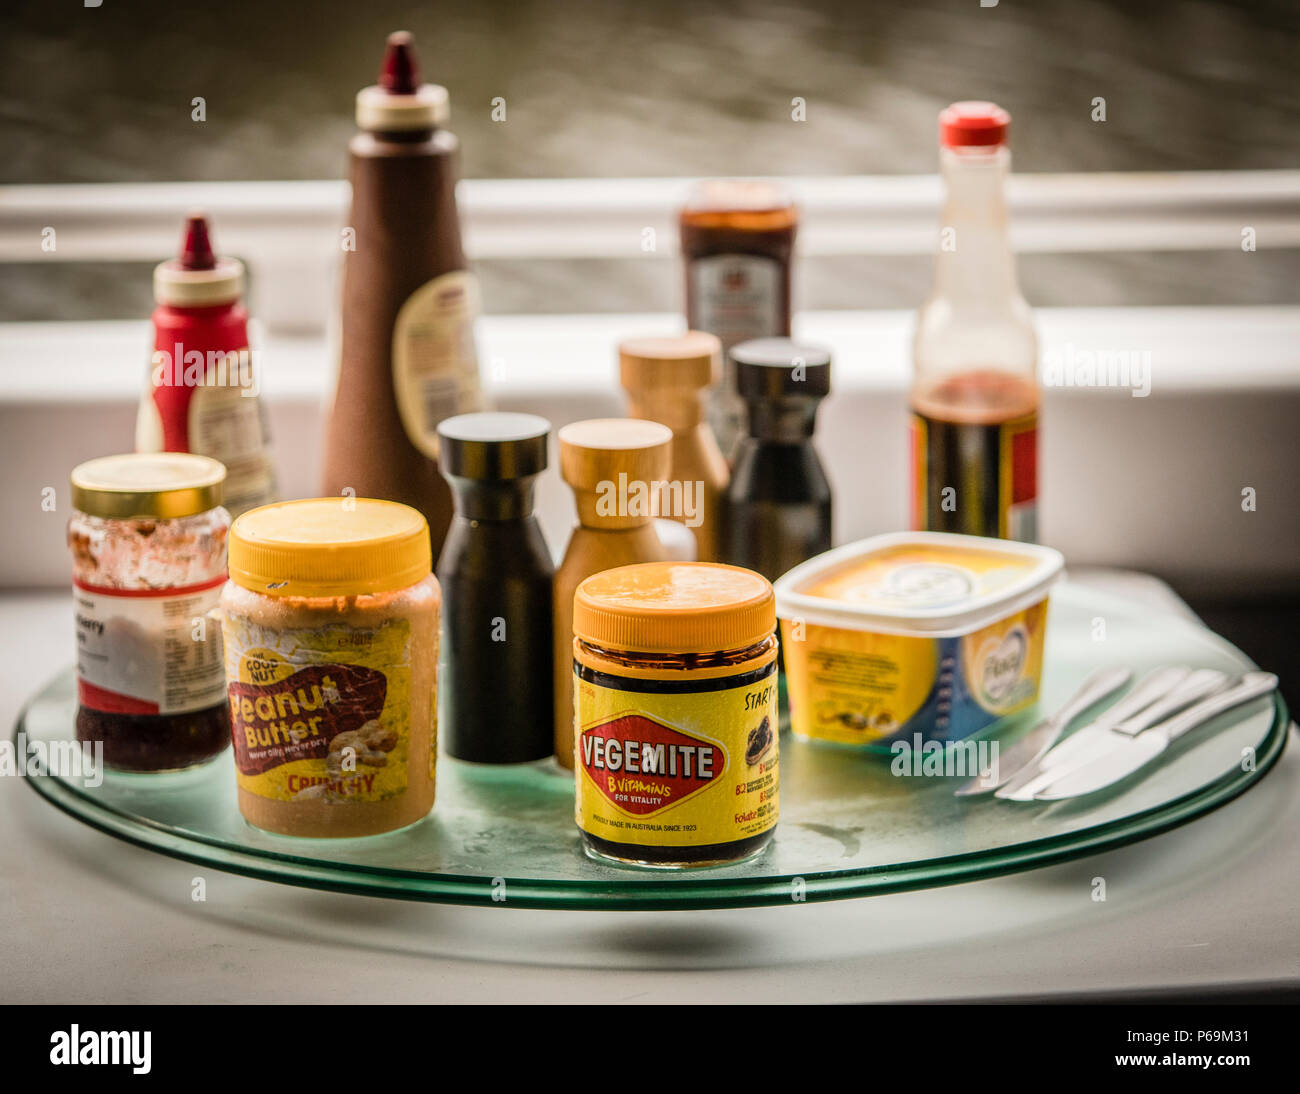 The Australian Vegemite Buffet: Vegemite is high in vitamin B and Aussies swear that mosquitoes only seldom bother them because they eat it all the time Stock Photo